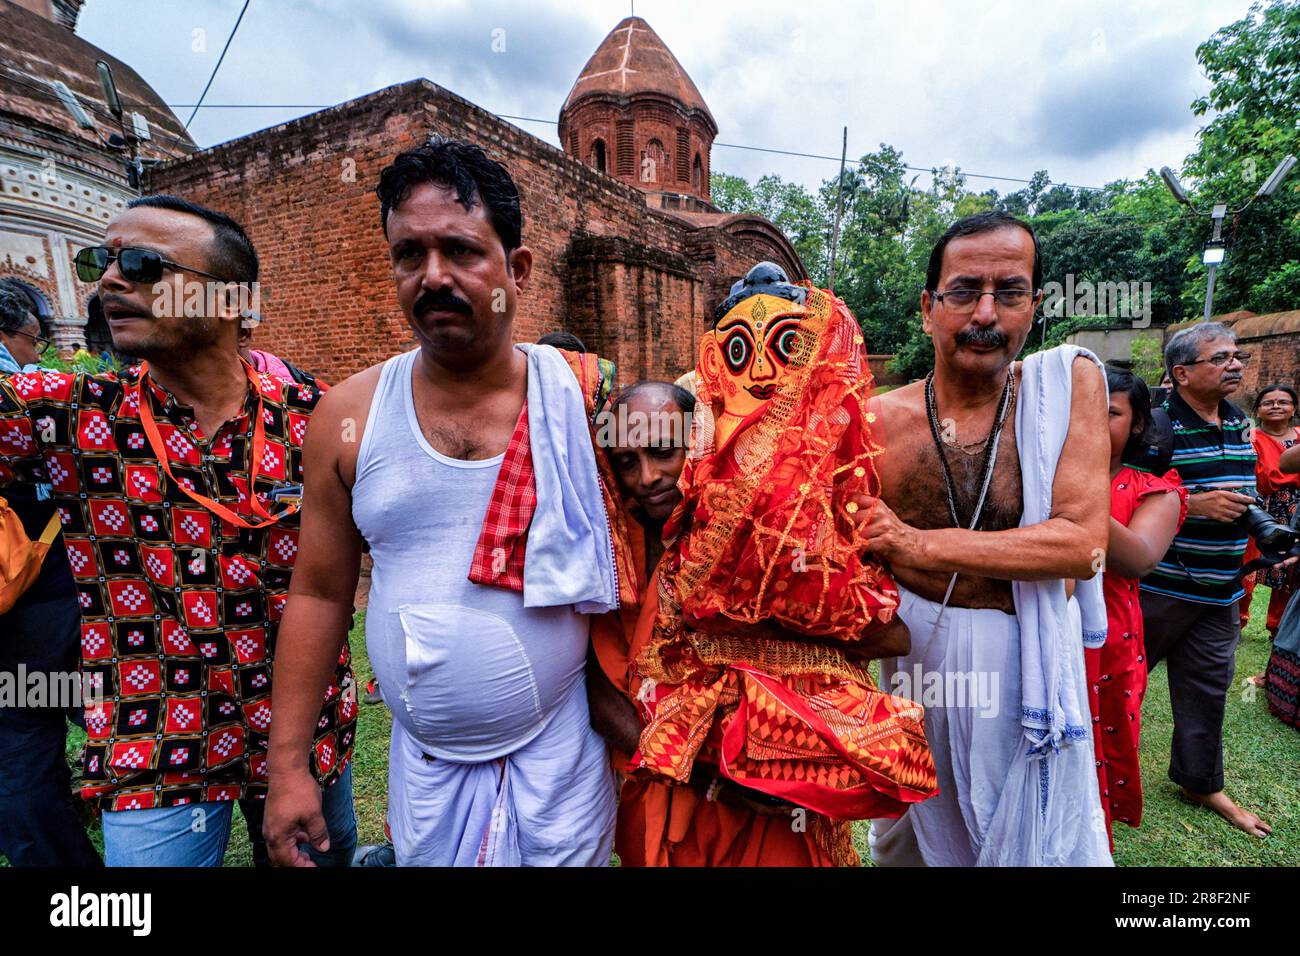 Guptipara, India. 20th June, 2023. Hindu devotees seen carrying an Idol of Lord Subhadra during the Chariot Festival/Ratha Yatra in Guptipara which is almost 100 km East from Kolkata. Ratha Yatra, also called Rathayatra, Rathajatra, or Chariot festival related to Lord Jagannath, is celebrated throughout the World as per Hindu Mythology. Rathayatra is a journey in a chariot of Lord Jagannath accompanied by the public celebrated annually. Dozens of faithful gathered to witness the festival. Credit: SOPA Images Limited/Alamy Live News Stock Photo